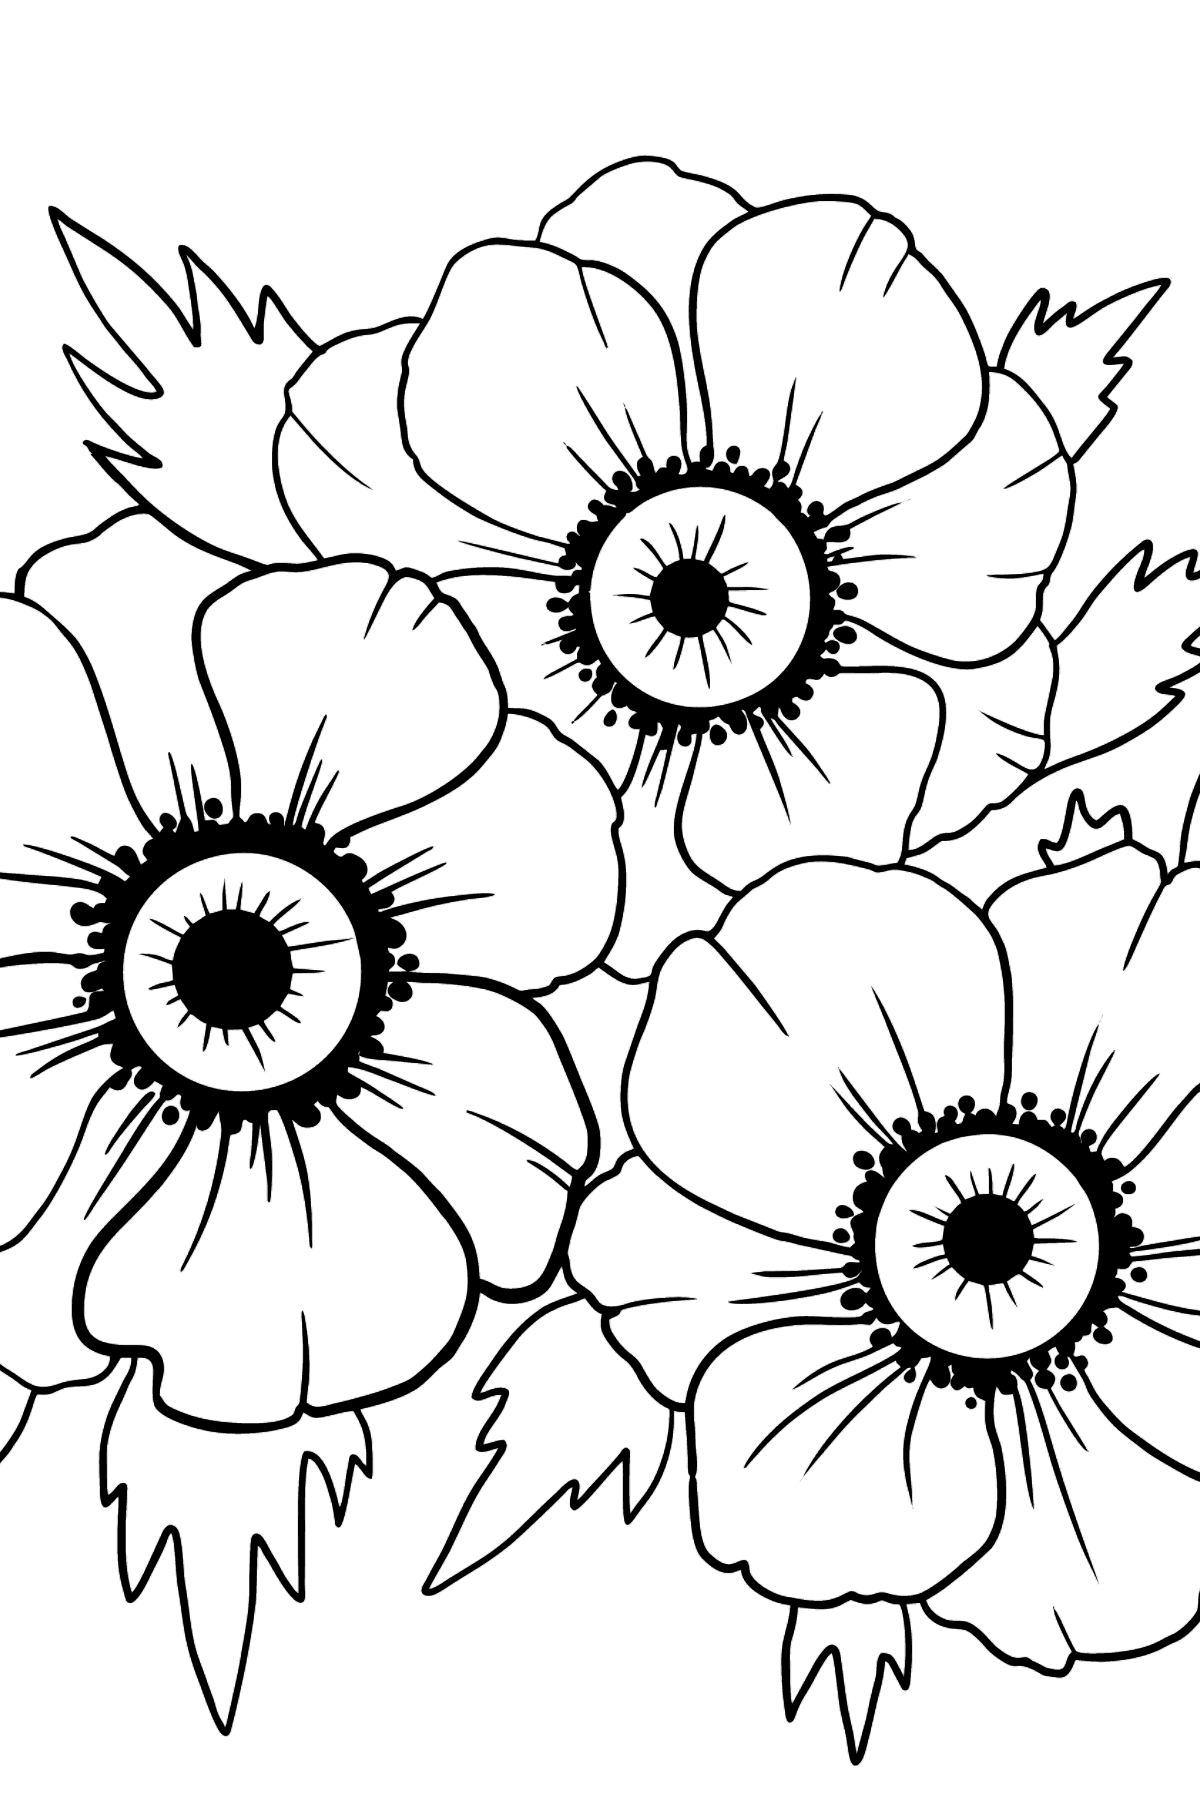 Flower Coloring Page - Anemone Mr. Fokker - Coloring Pages for Kids